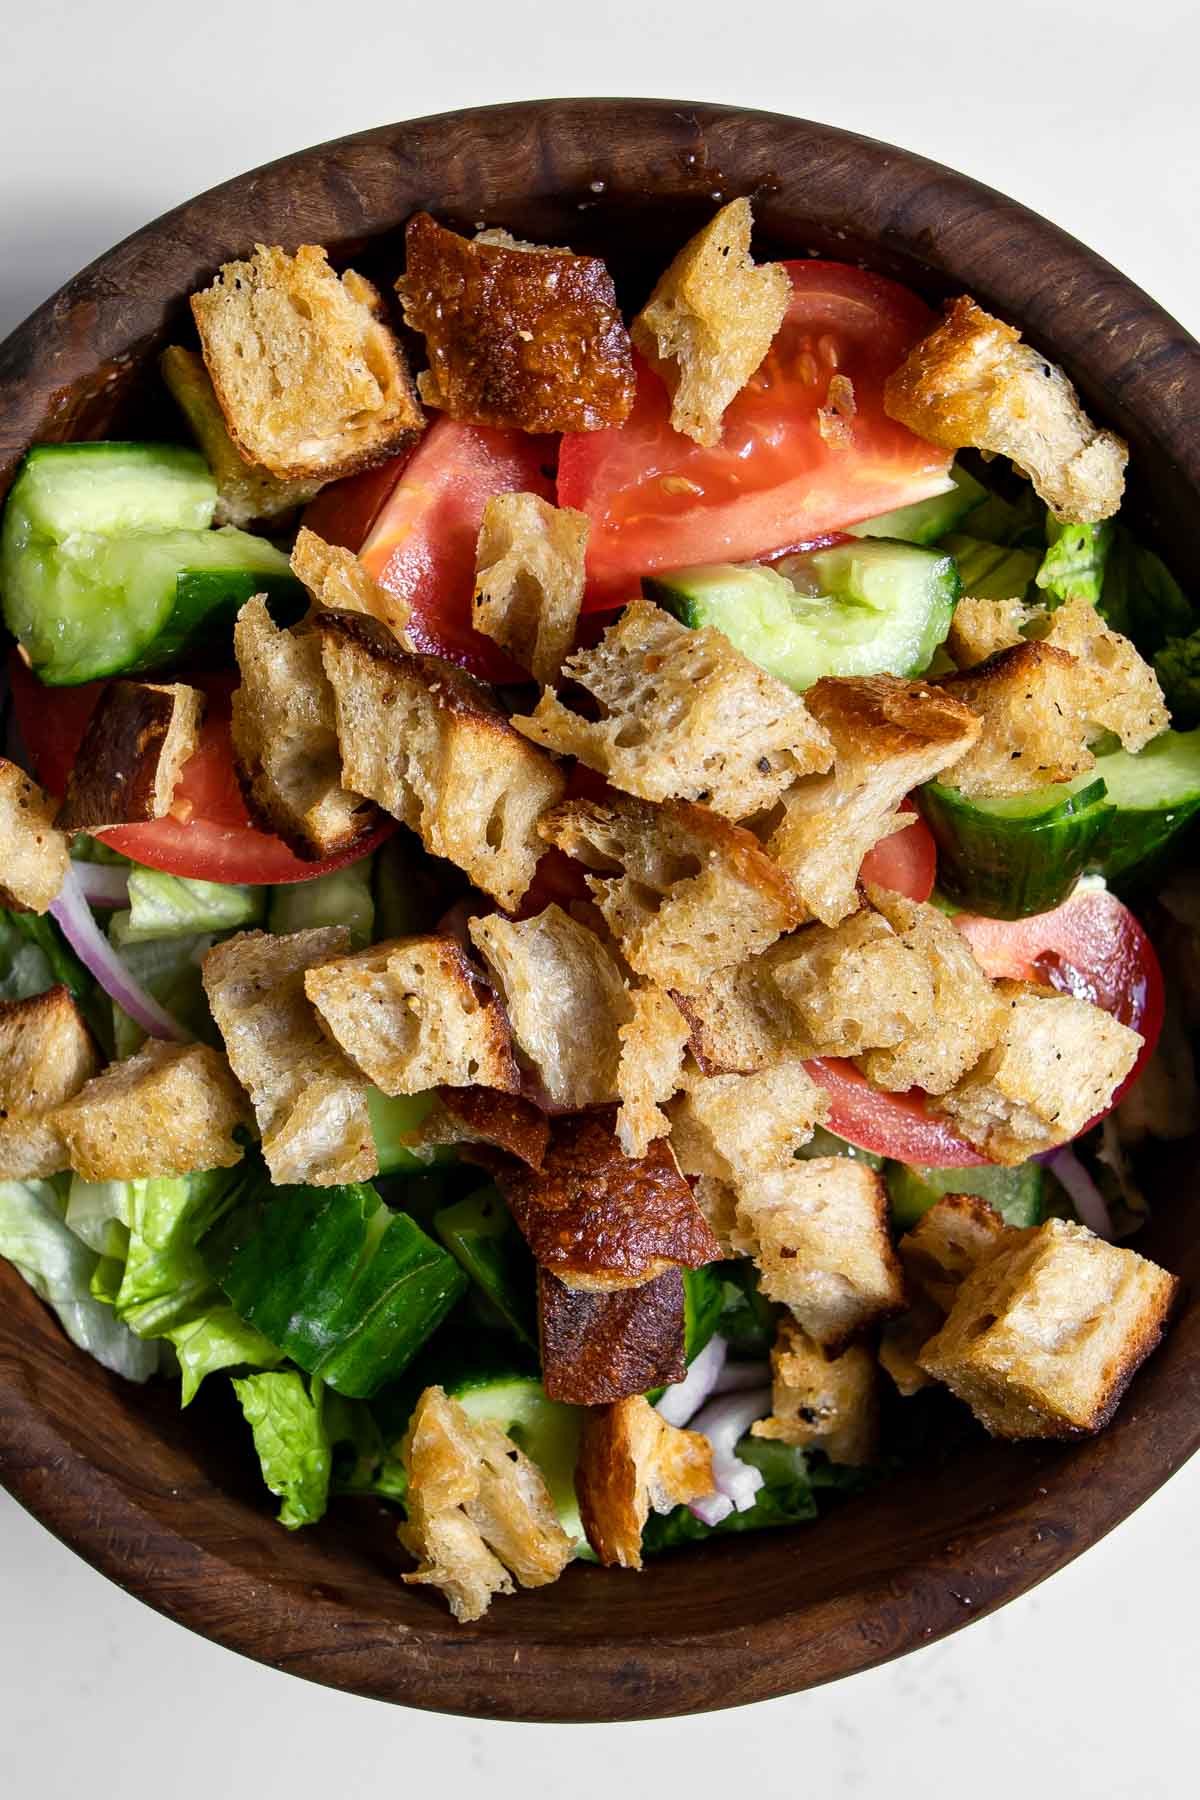 cucumber, tomato, red onions, and sourdough croutons in bowl with lettuce.